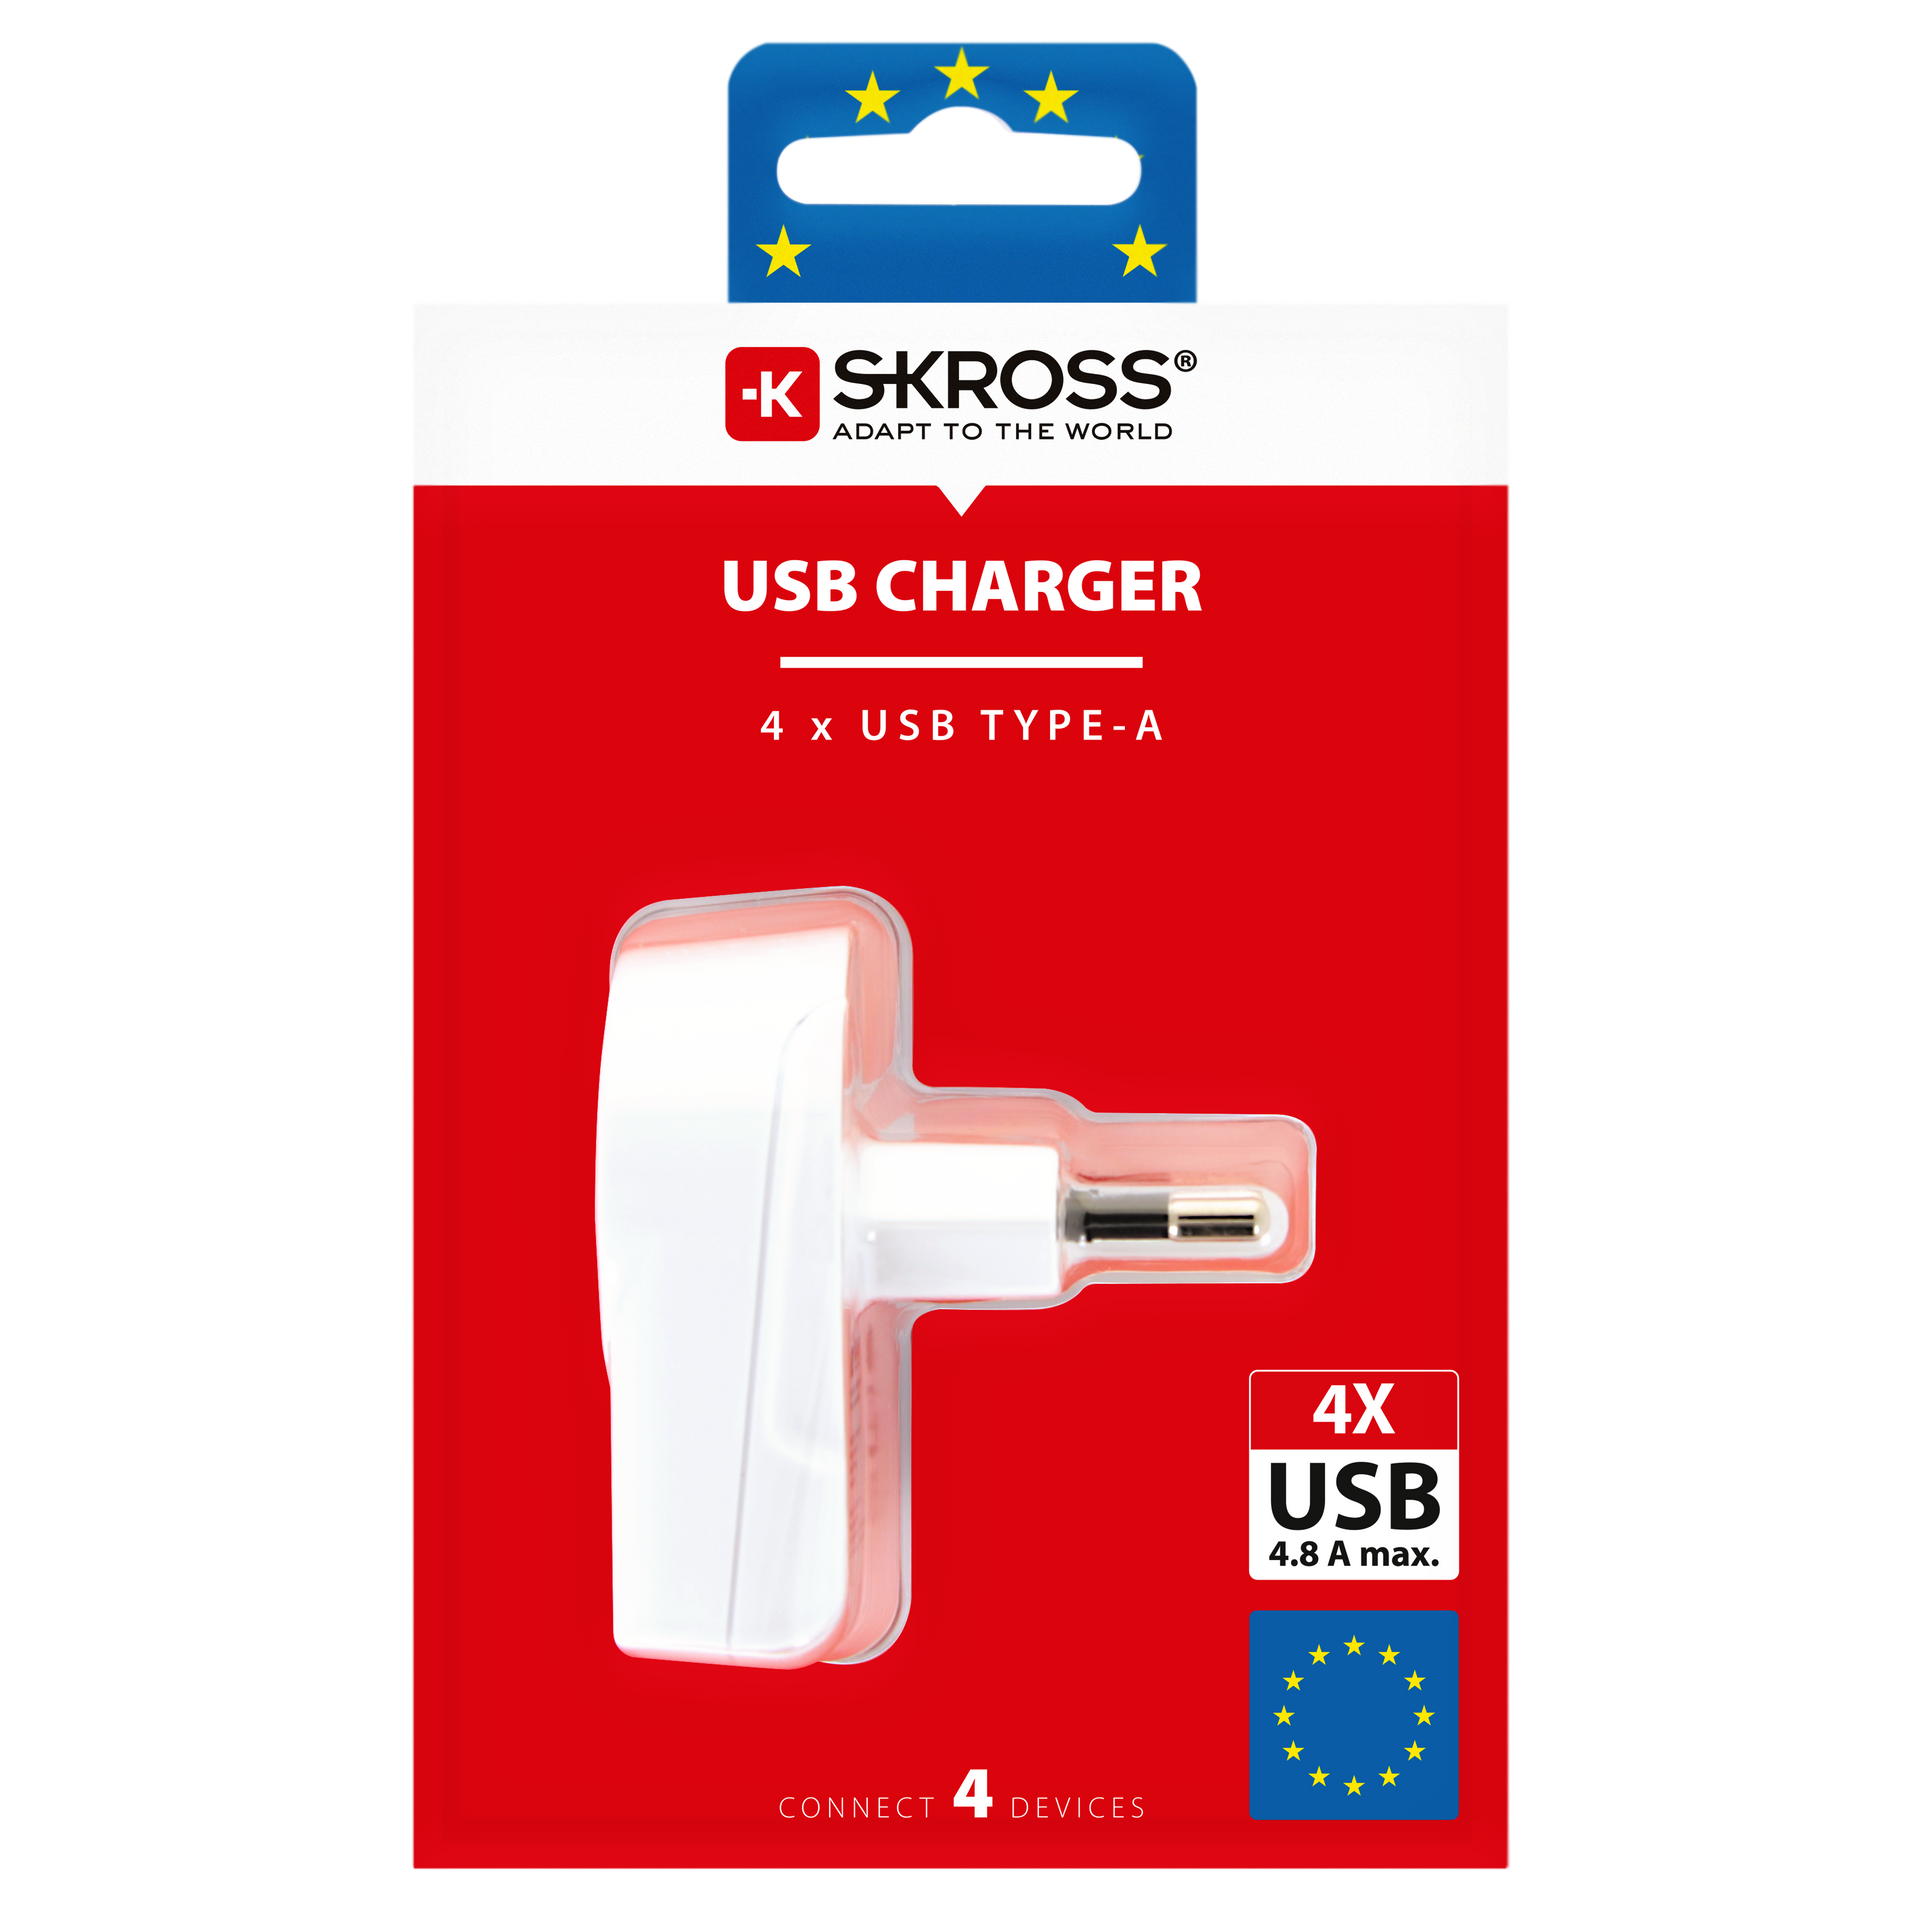 Skross USB Charger. Euro USB Charger (4xA) Packaging 